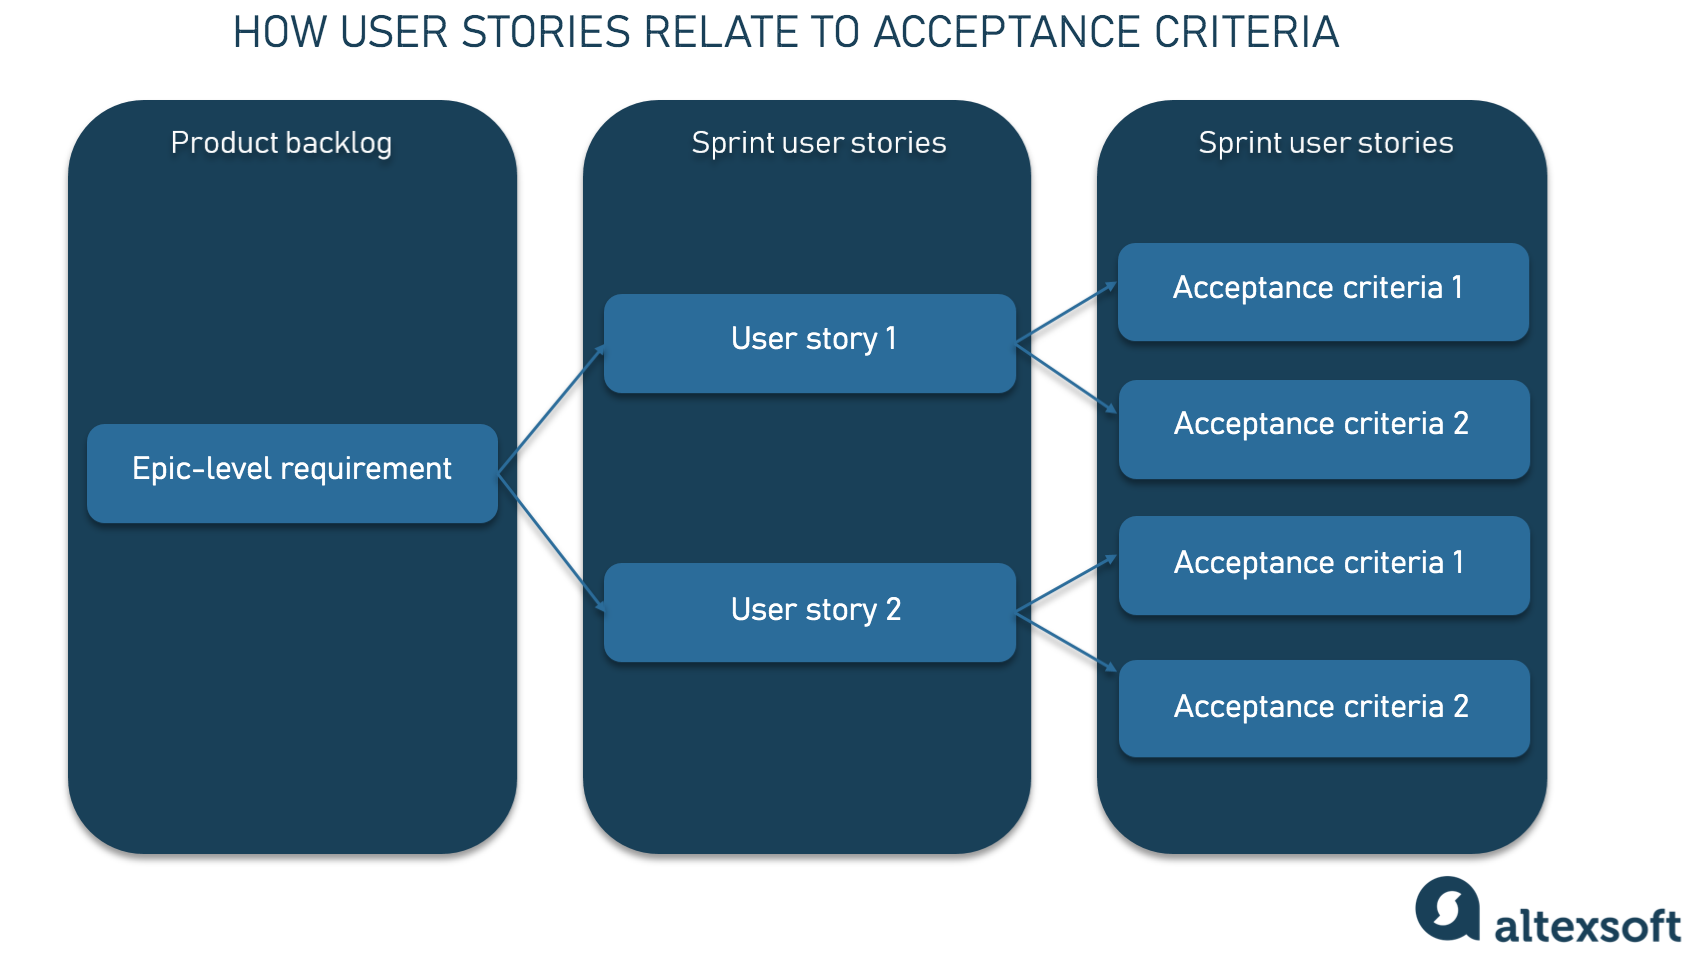 How requirements, user stories, and acceptance criteria relate to one another